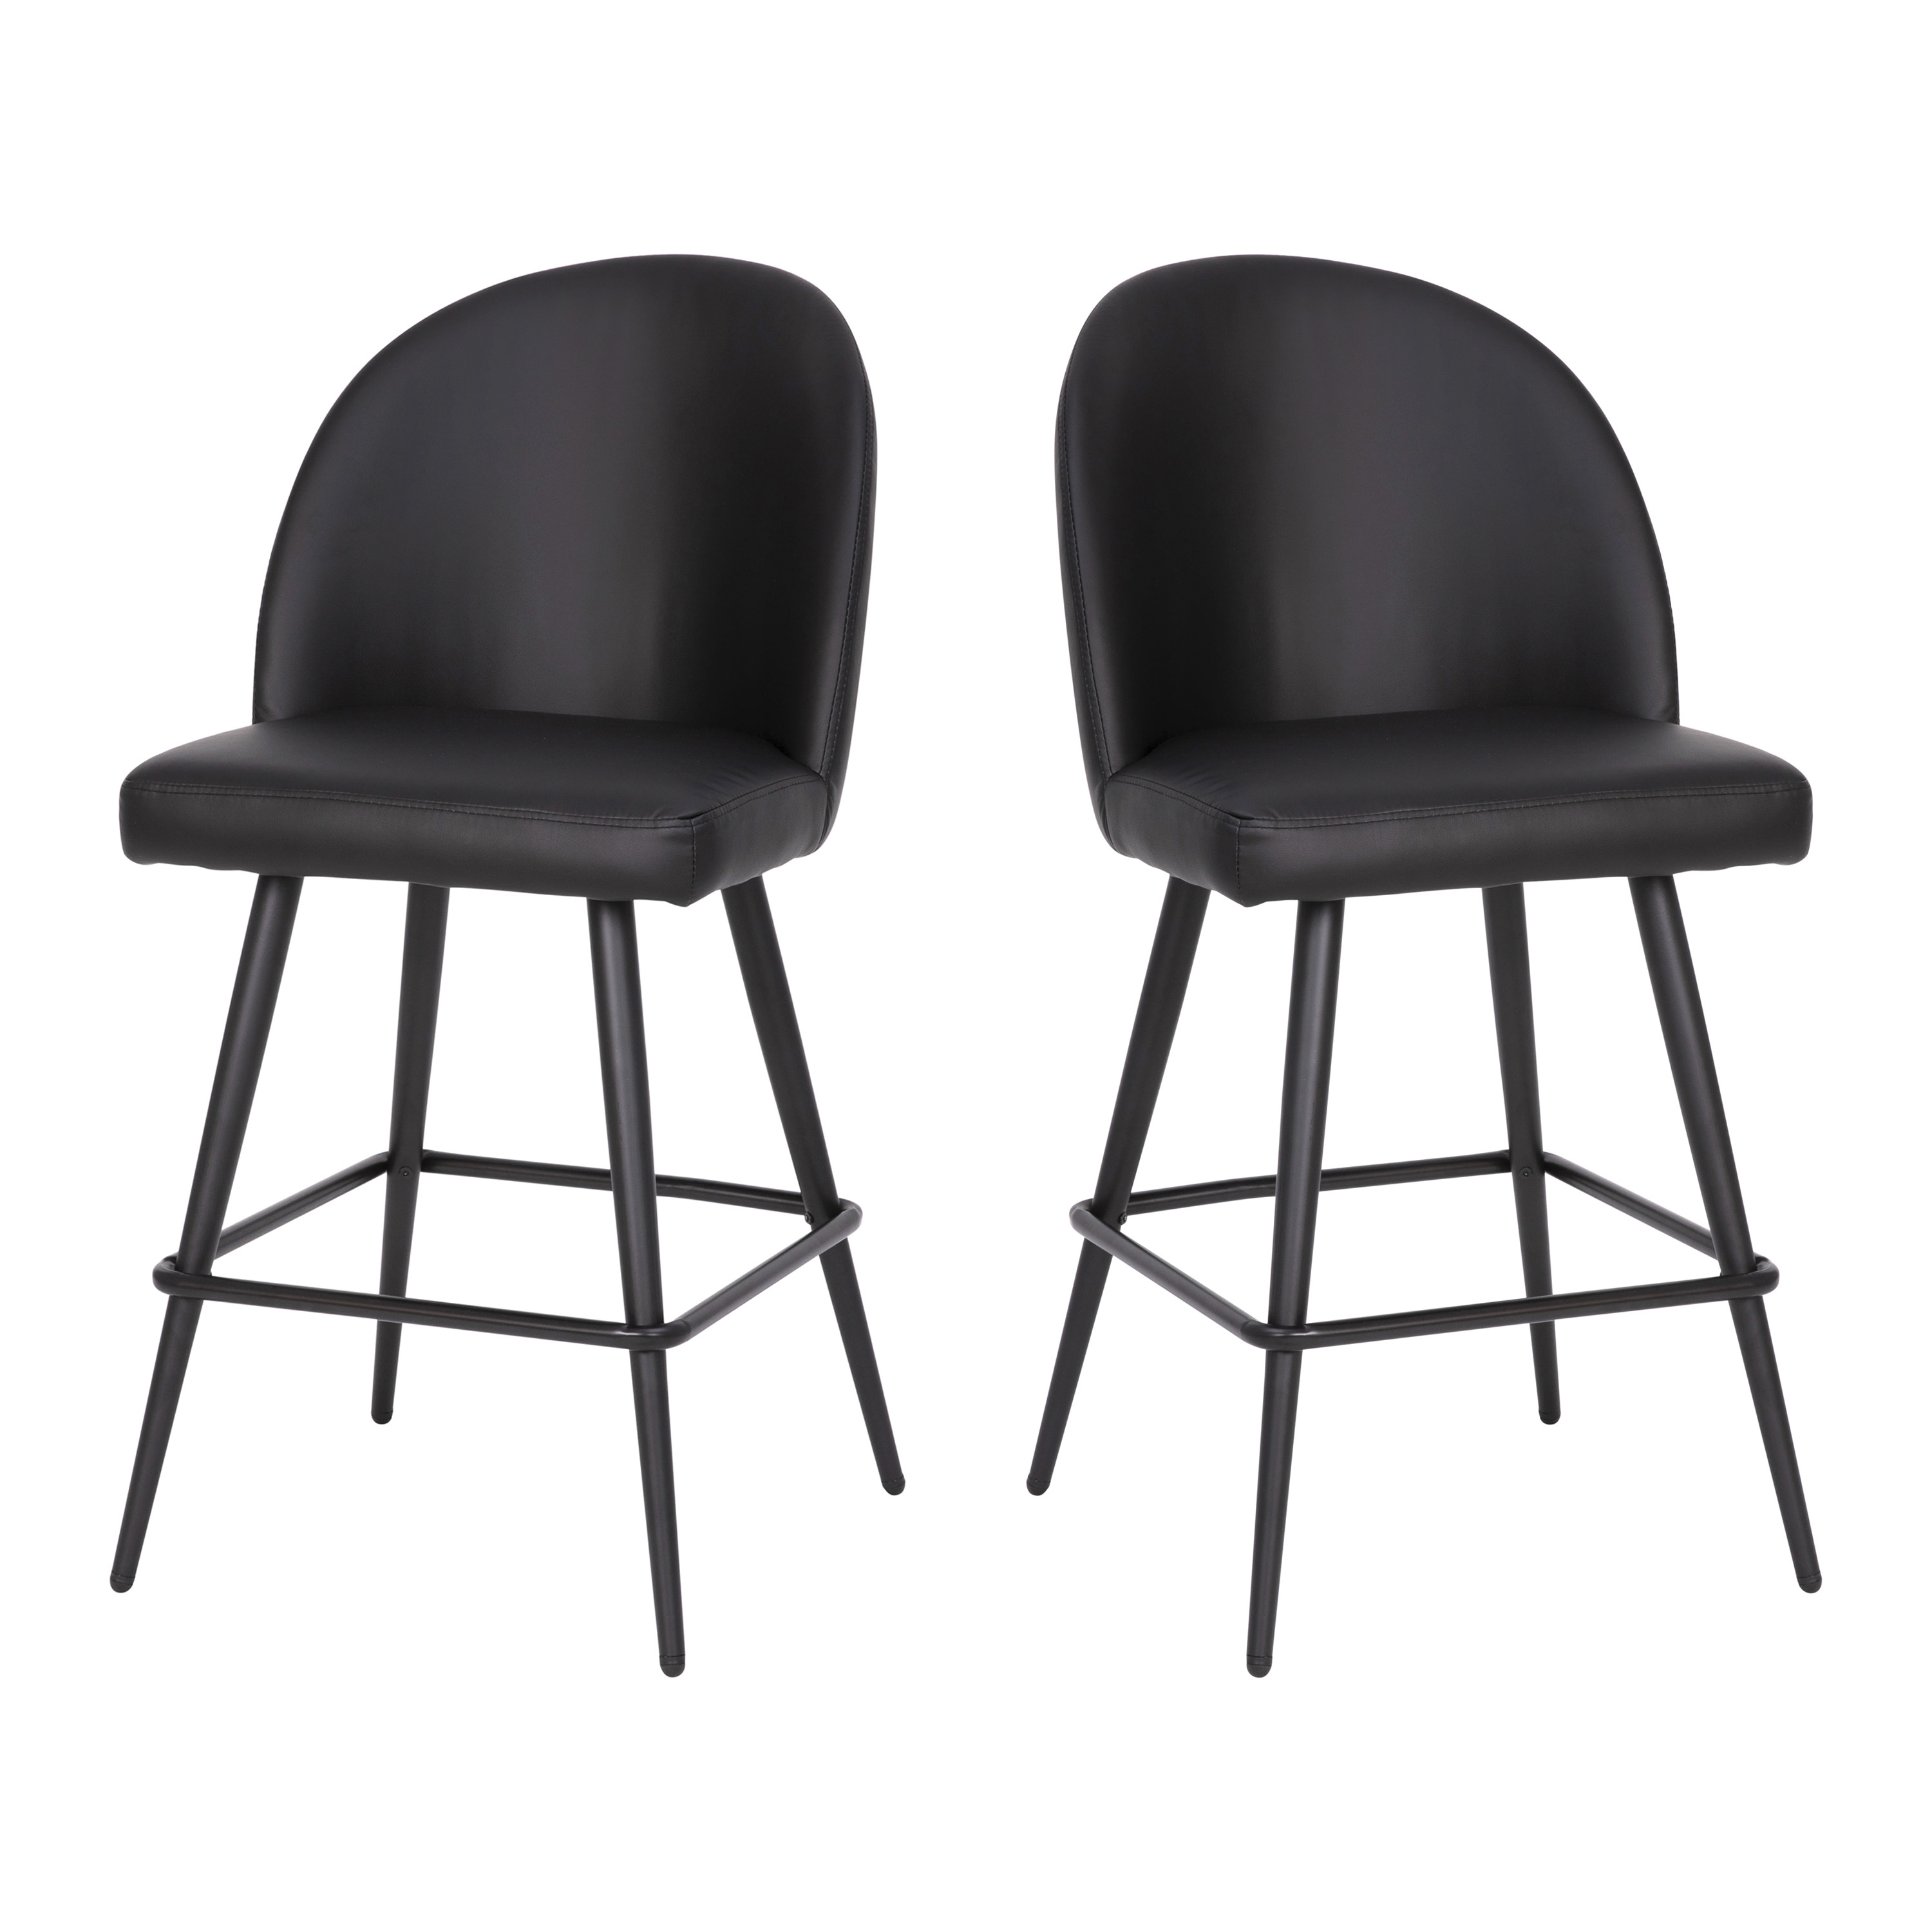 Flash Furniture AY-1026H-26-BK-GG Black LeatherSoft High Back Modern Armless 26" Counter Stool with Contoured Backrest, Set of 2